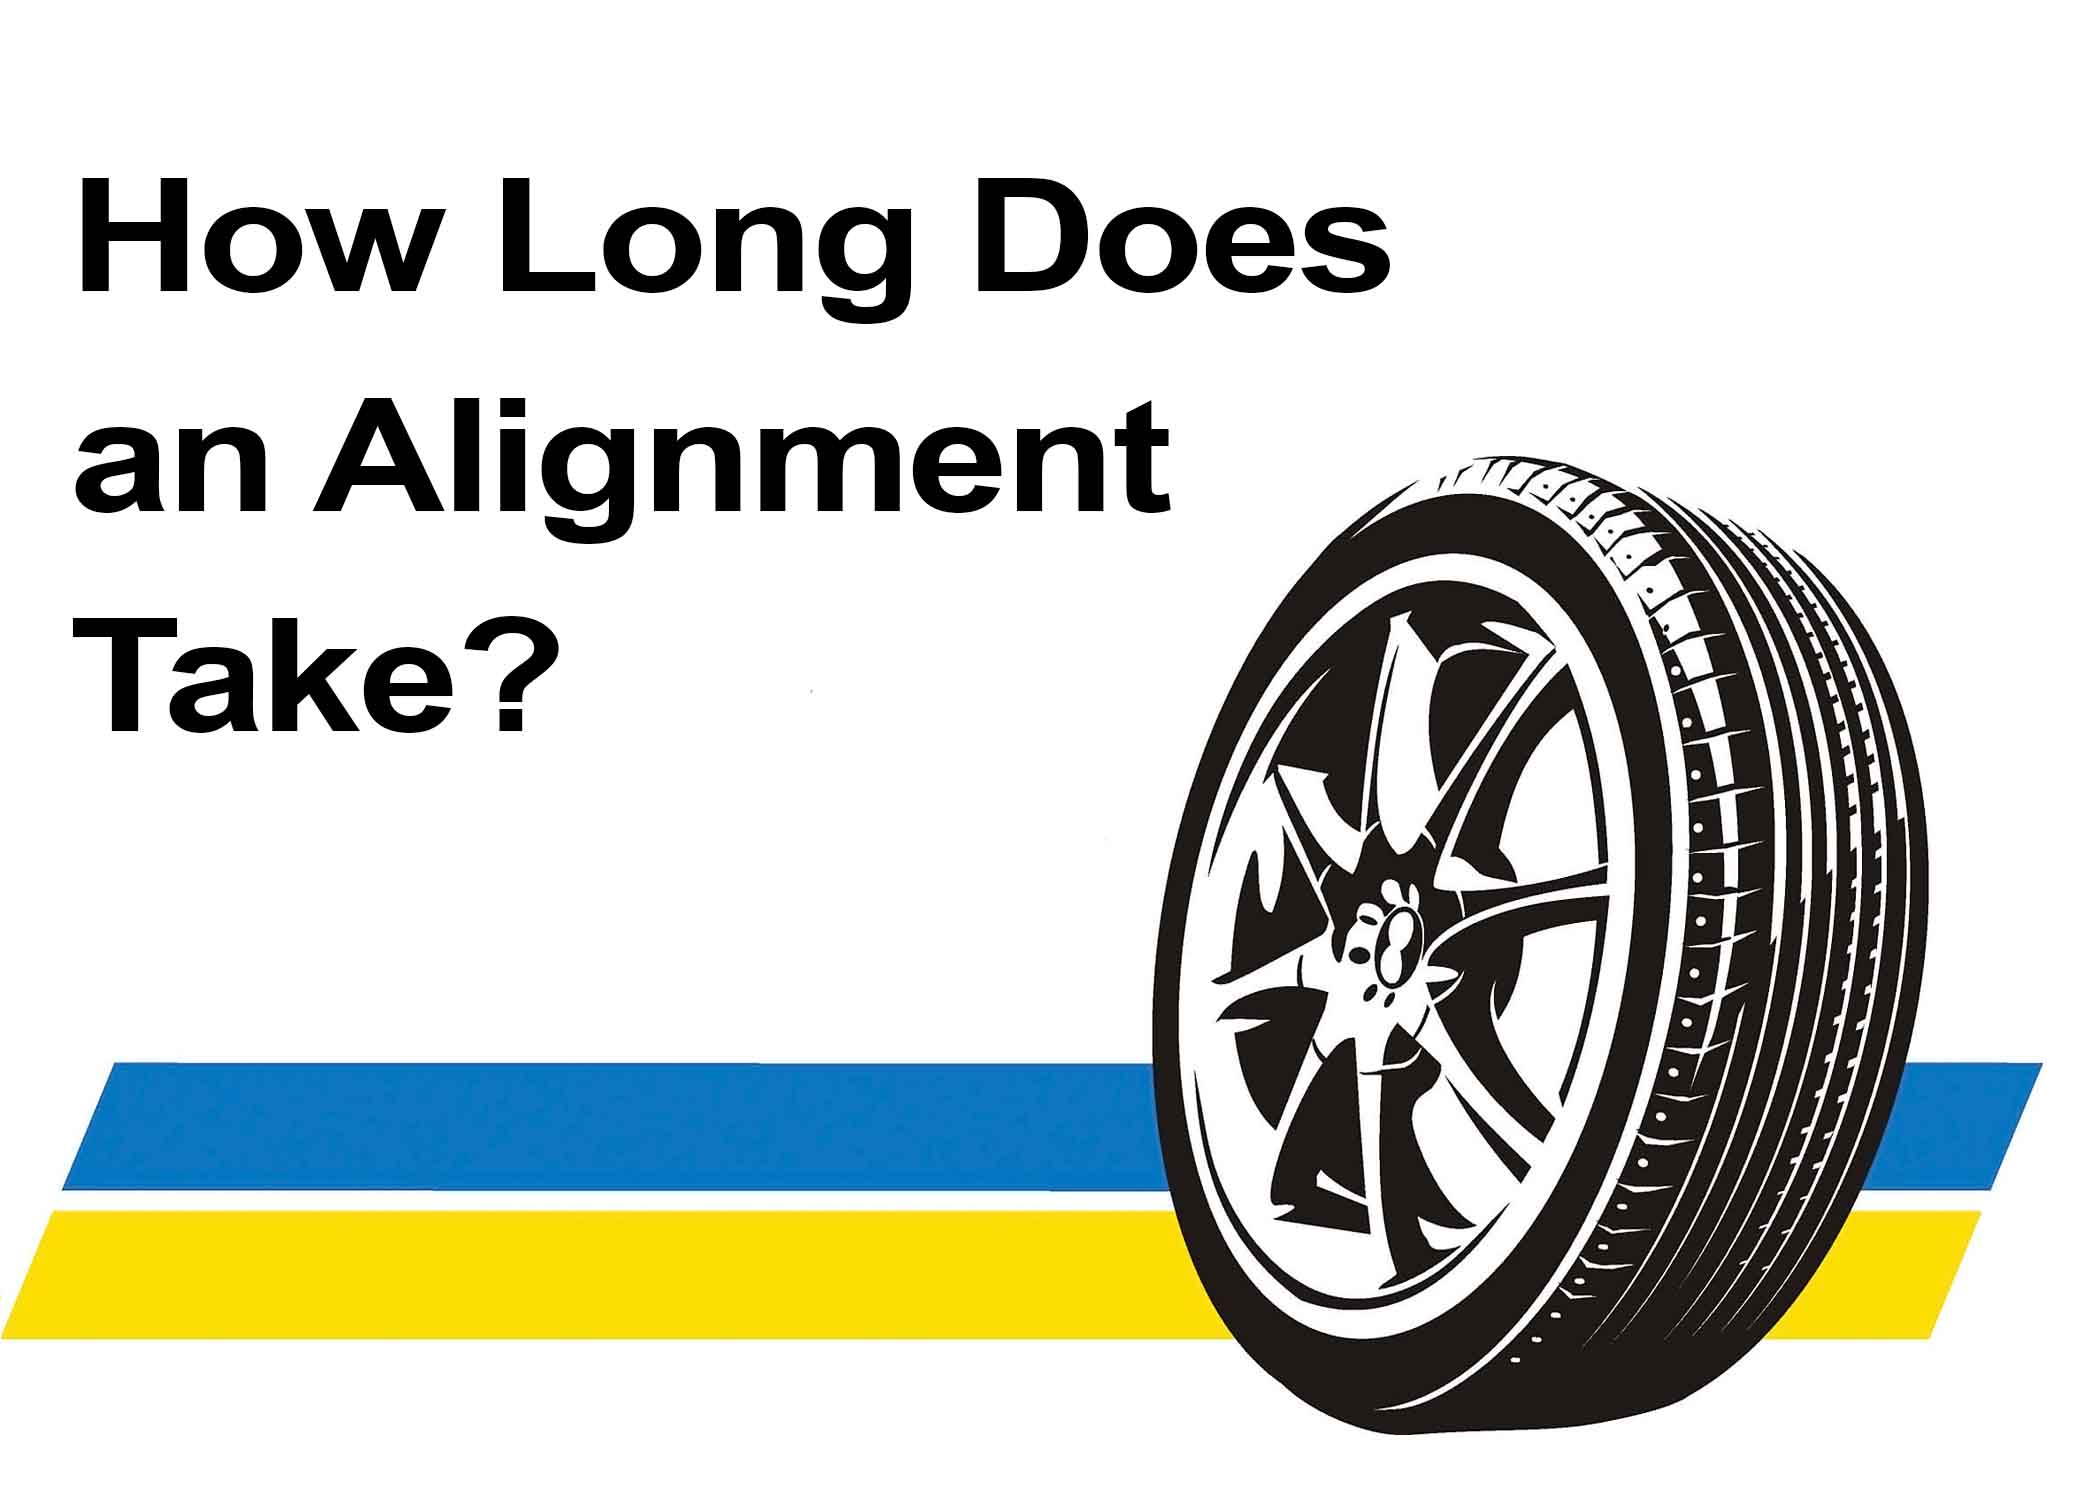 How Long Does an Alignment Take